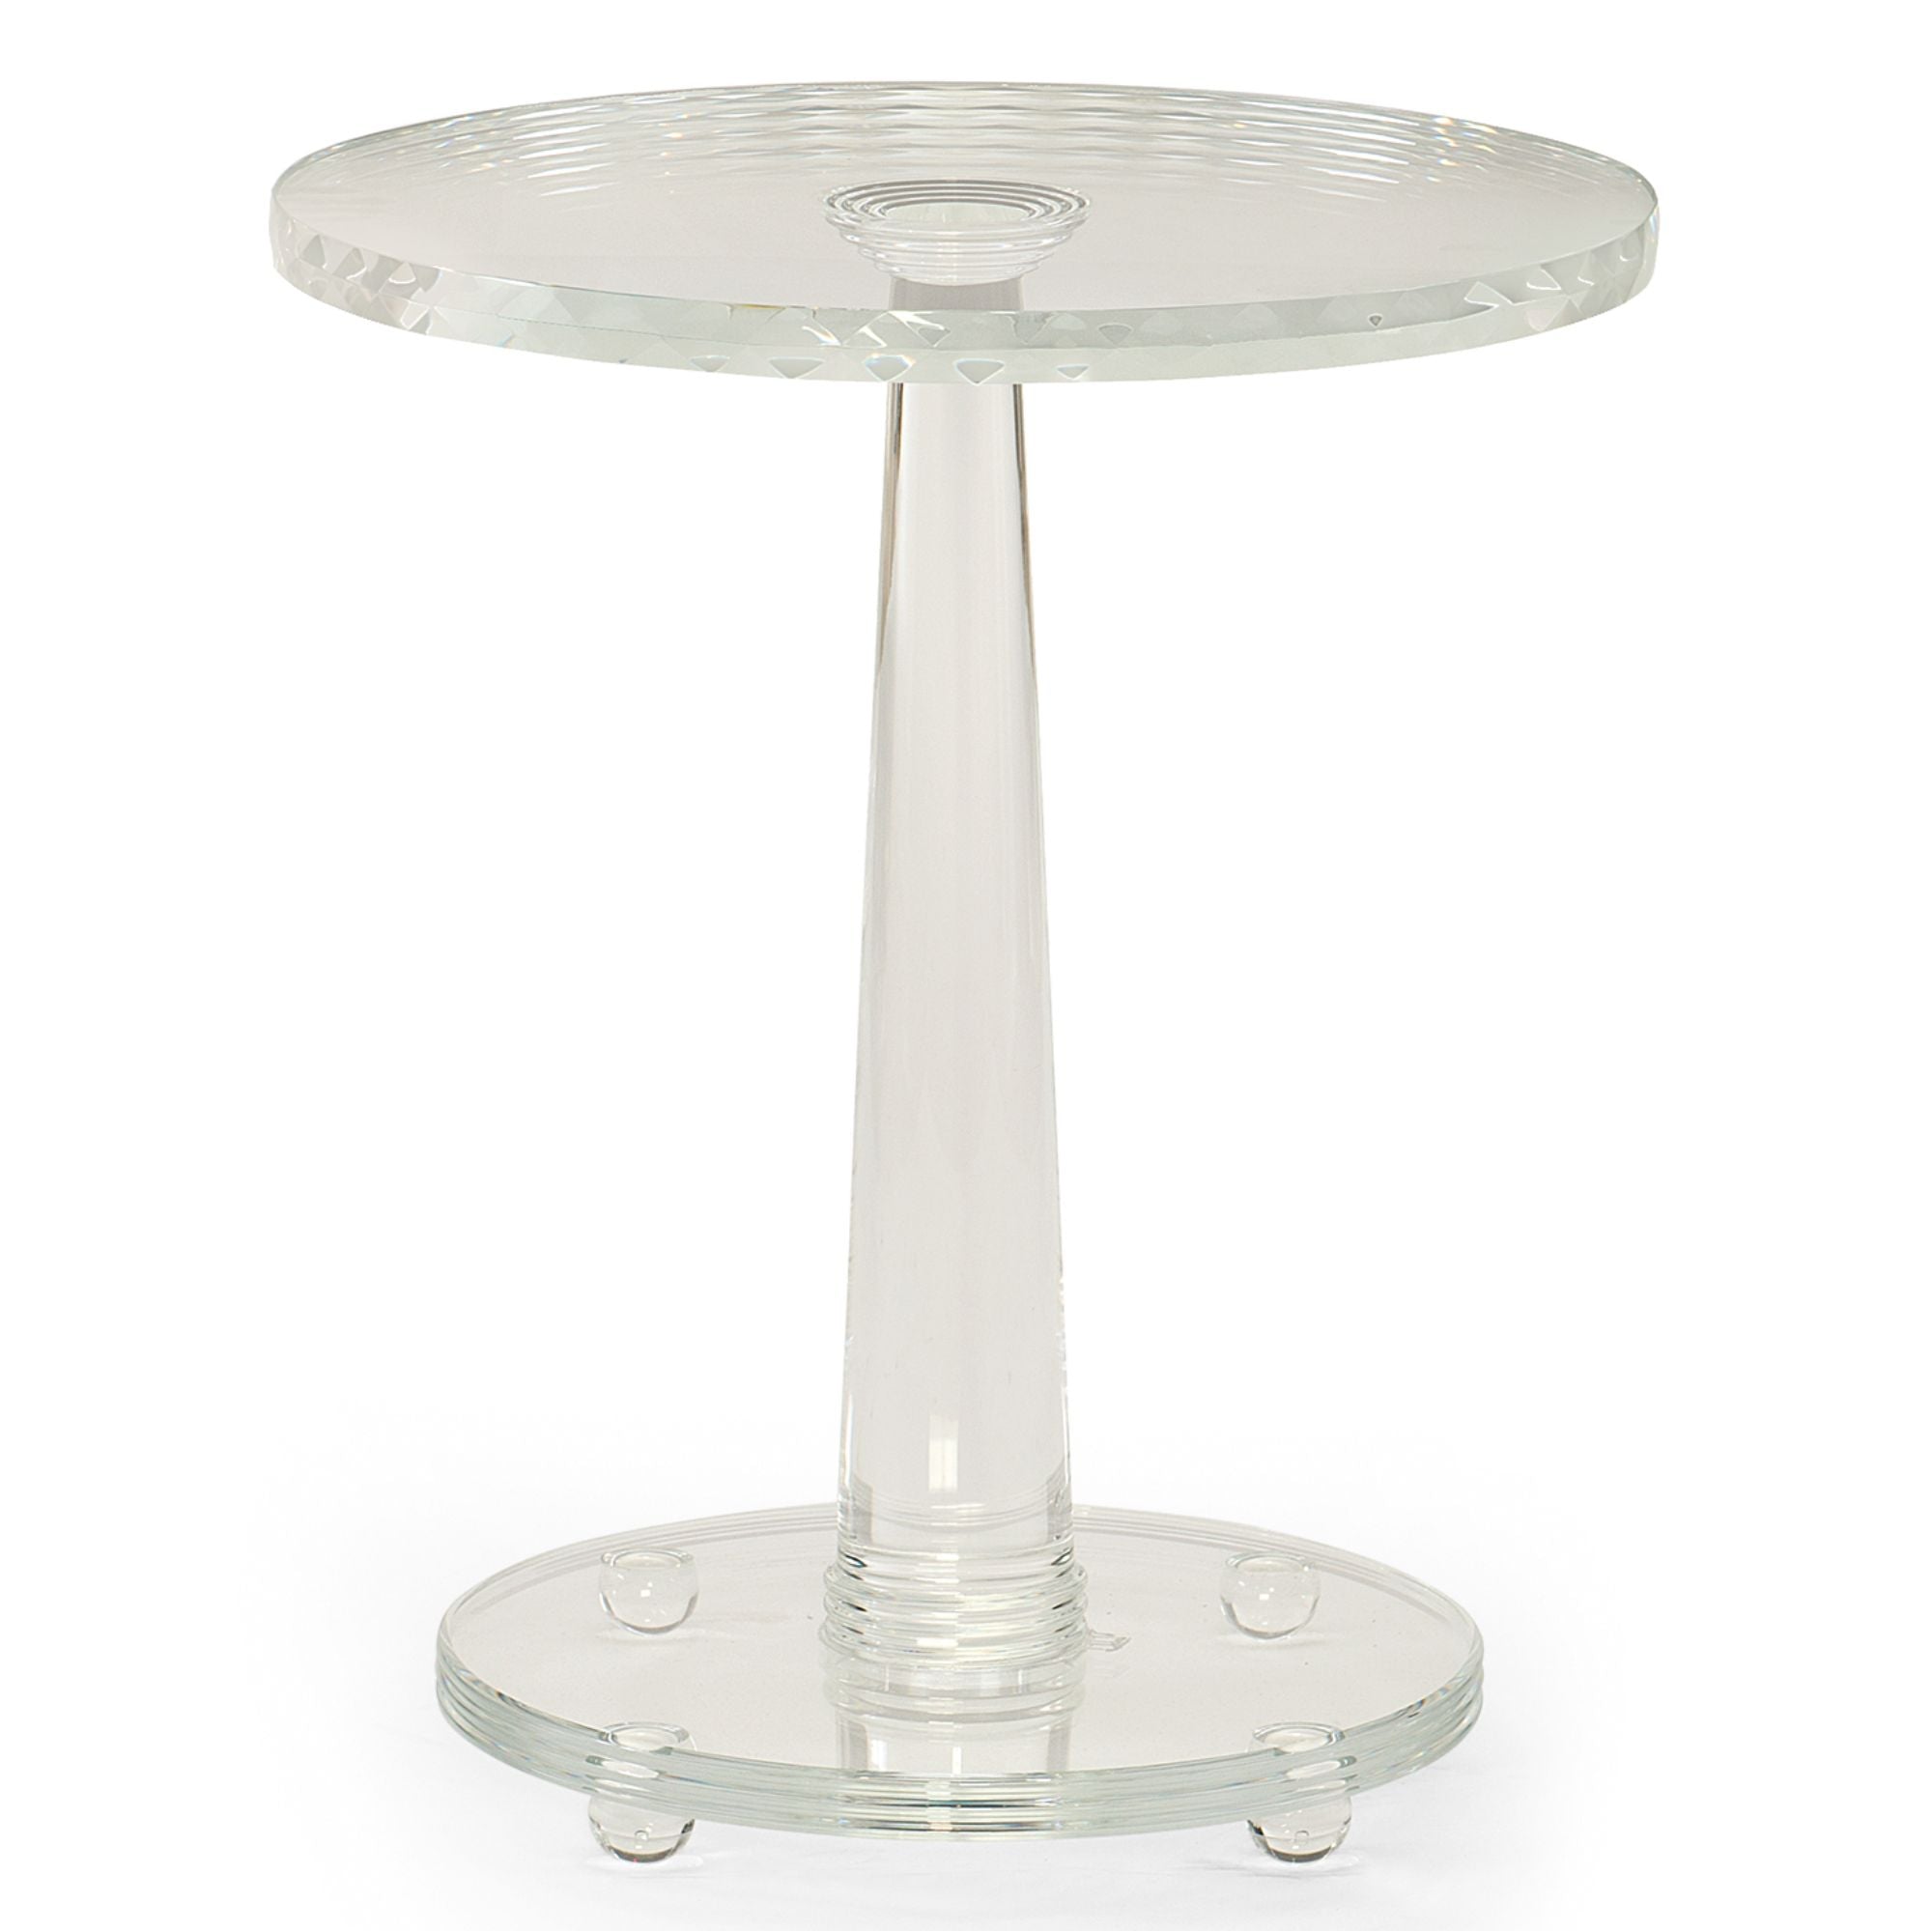 Caracole Signature Debut The Sophisticated Side Table